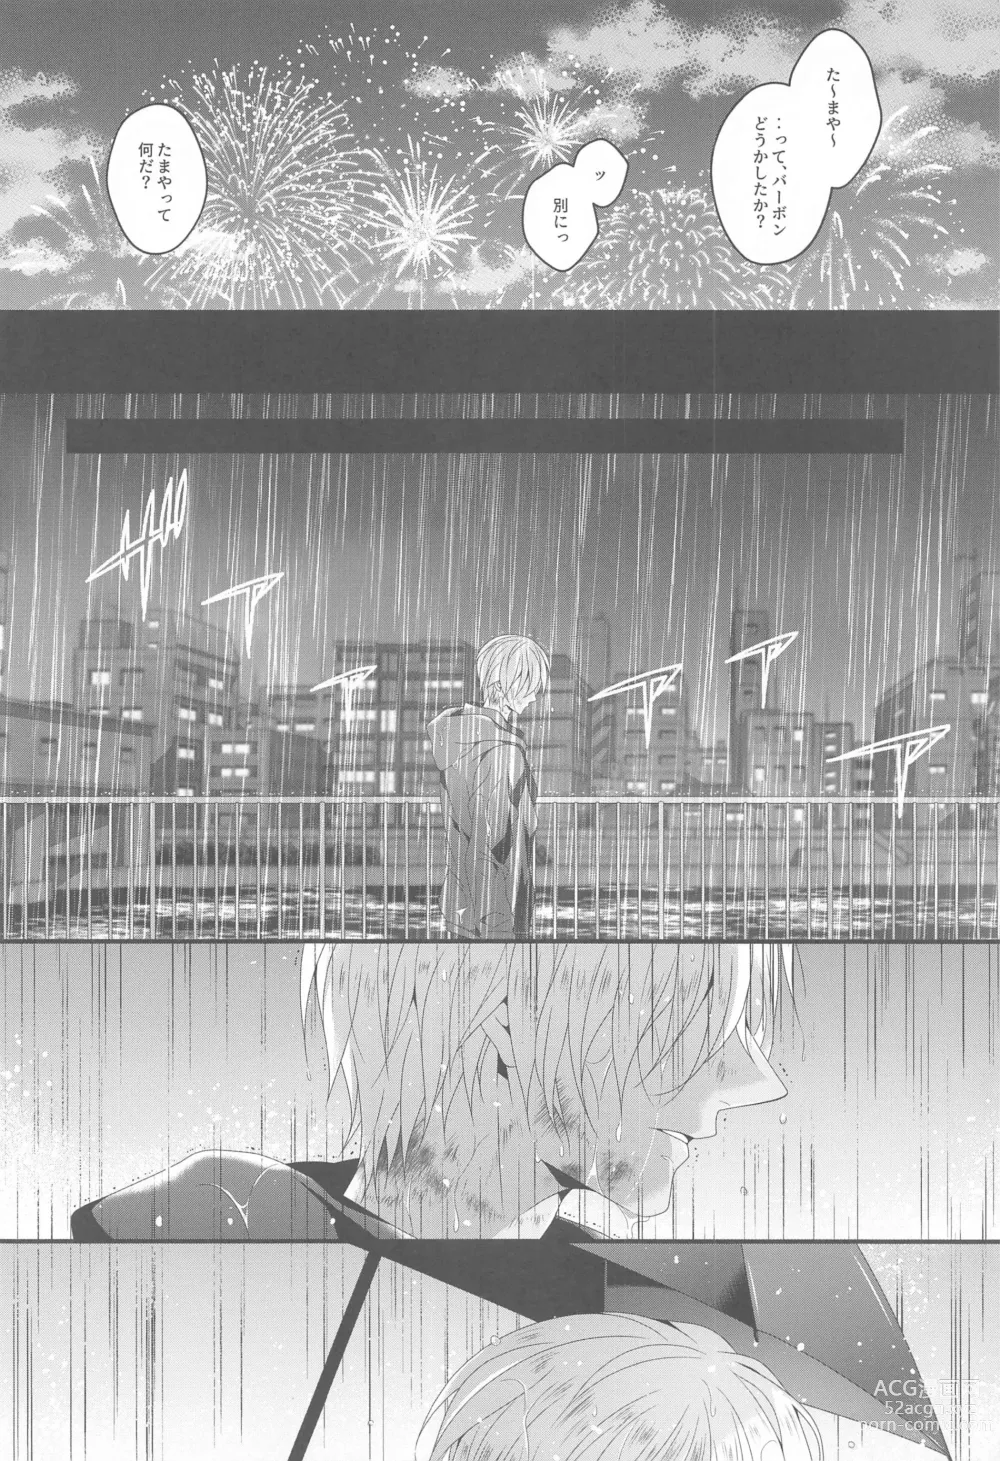 Page 5 of doujinshi Aibetsuriku no Yosame - A rainy night the pain of separation from loved ones